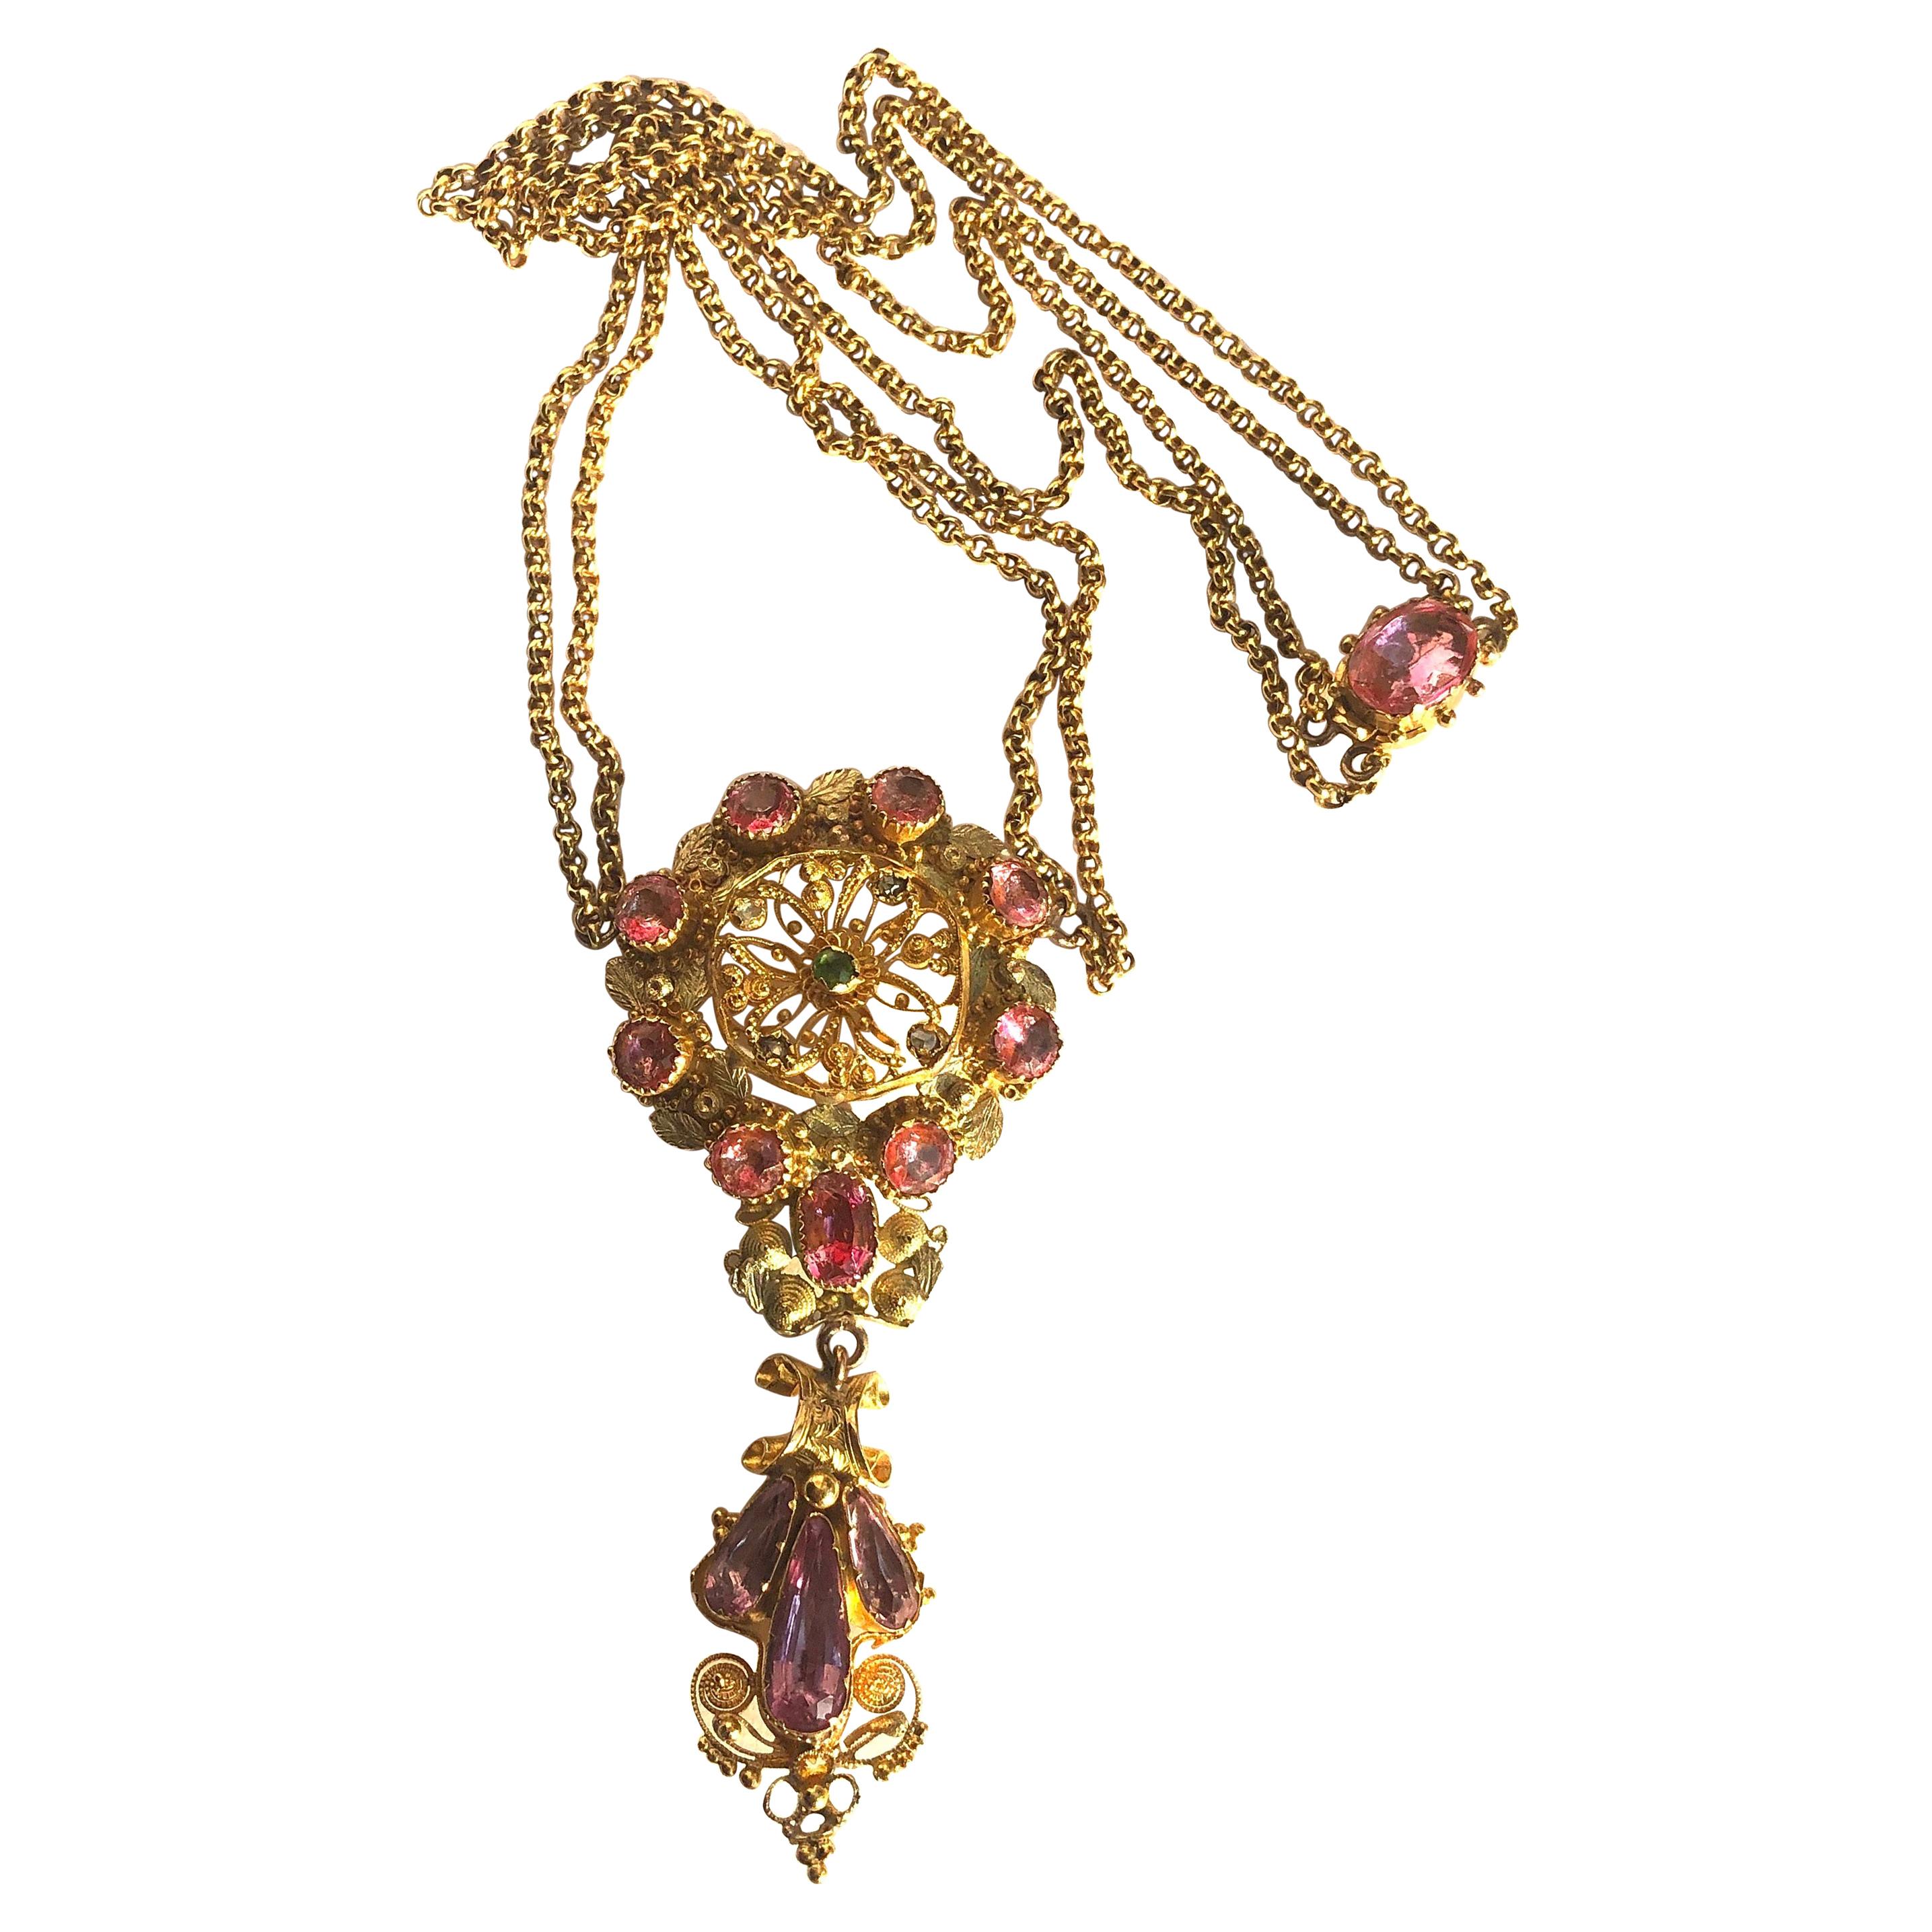 The metal work detail in this necklace is exquisite! The pendant itself holds a peridot stone at the centre and surrounding it there are fur small rose cut diamonds. The pendant is edged with pink topaz measuring 30pts and there is a drop holding